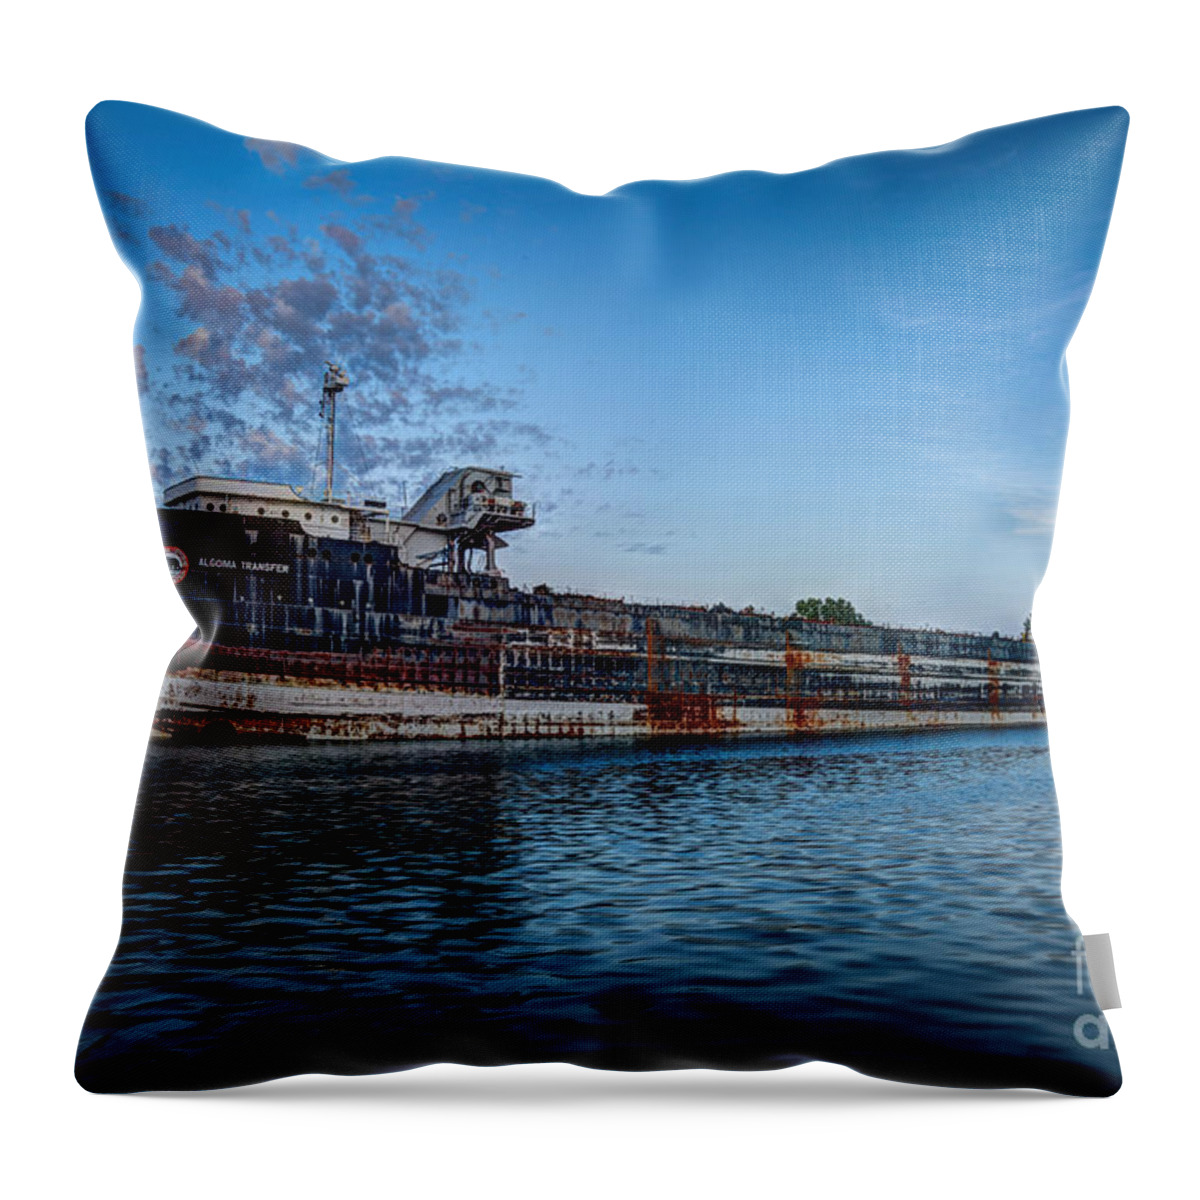 Abandoned Throw Pillow featuring the photograph Final Mooring for the Algoma Transfer by Roger Monahan